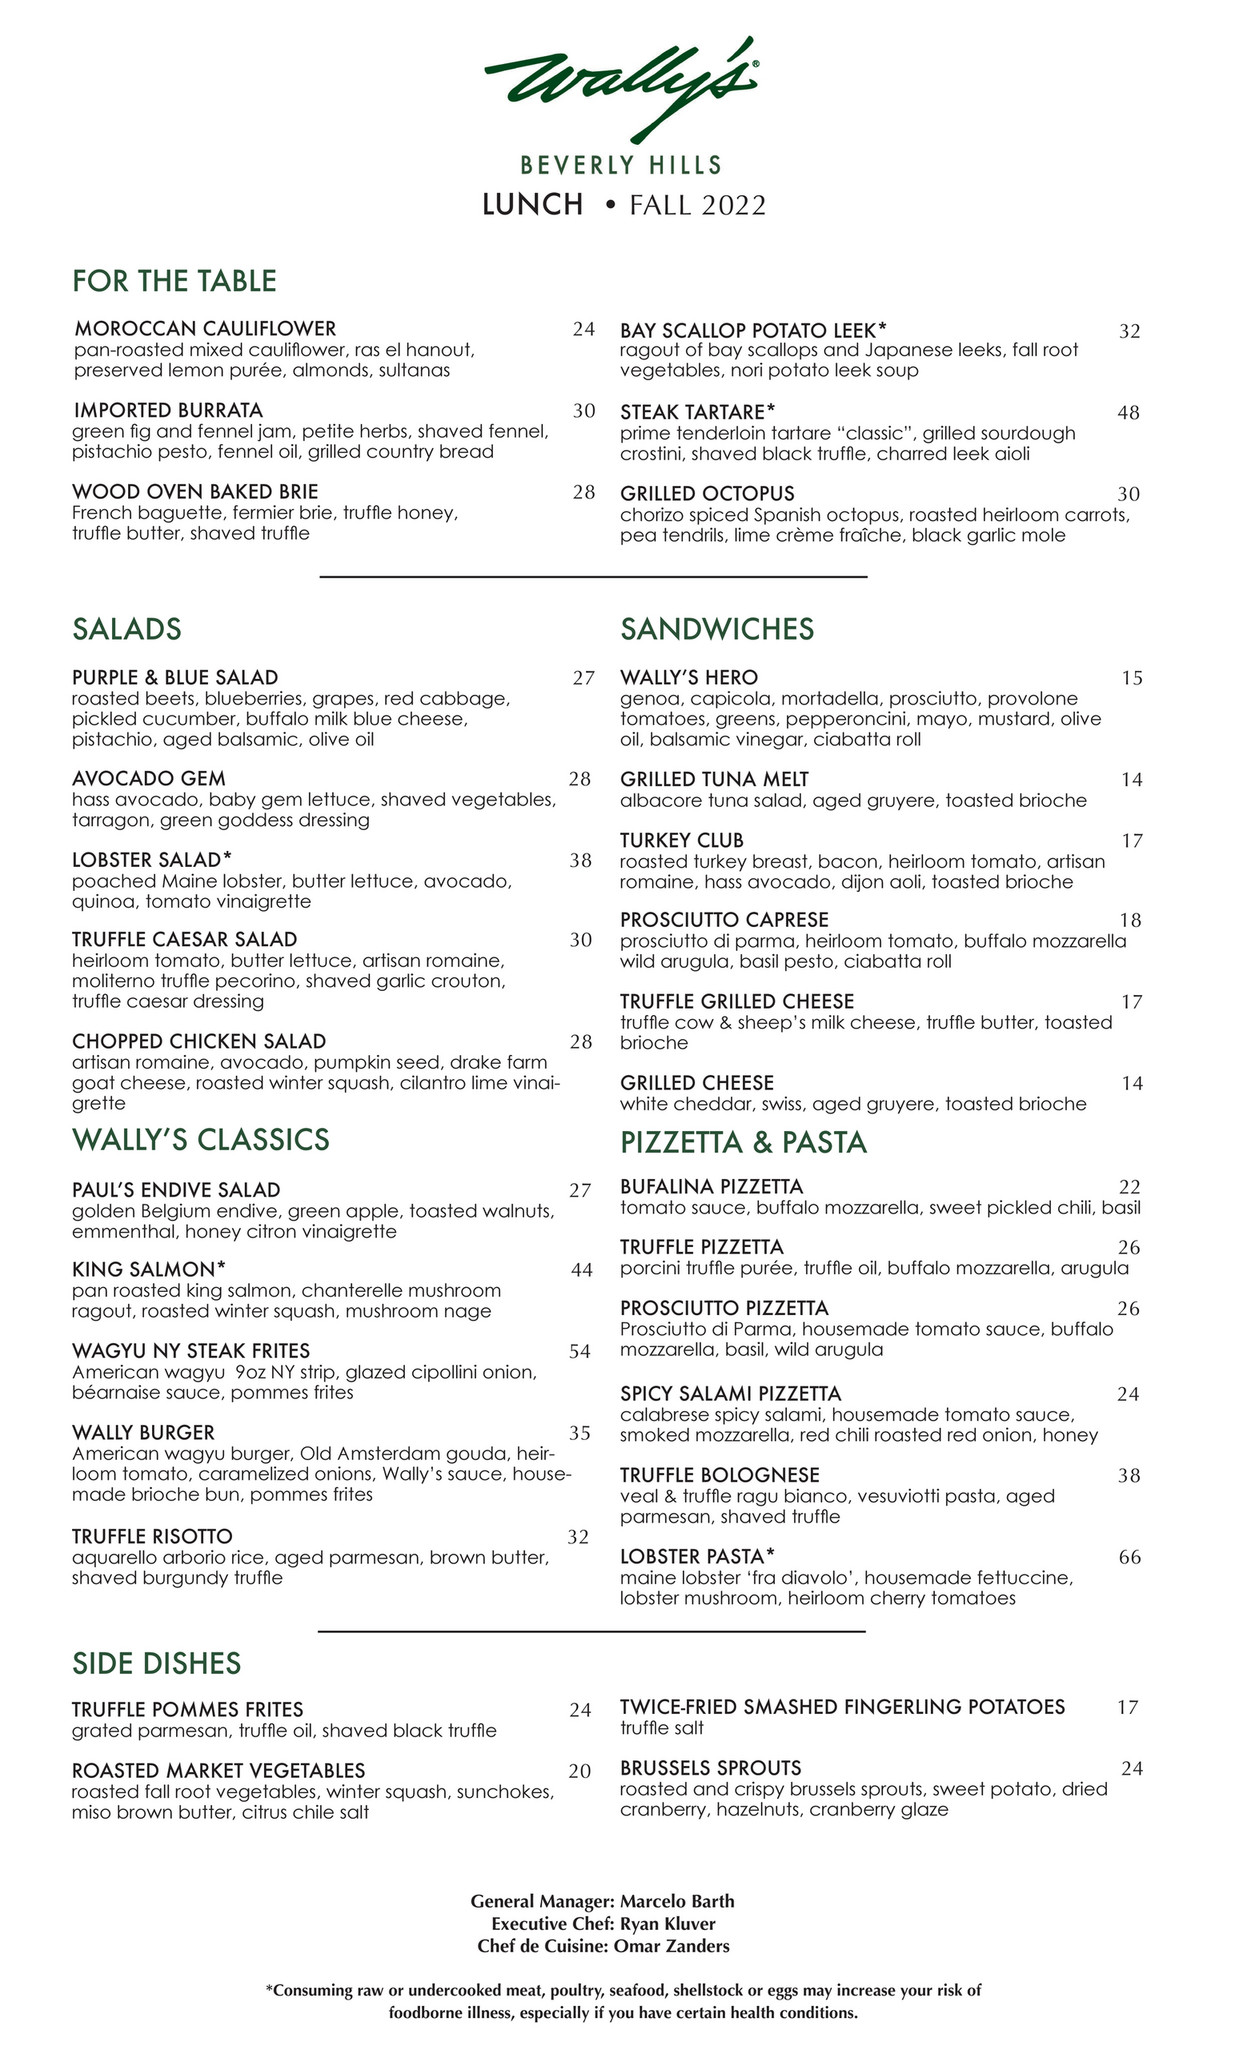 Wally's Wine and Spirits - Wally's Beverly Hills Lunch Menu - Page 1